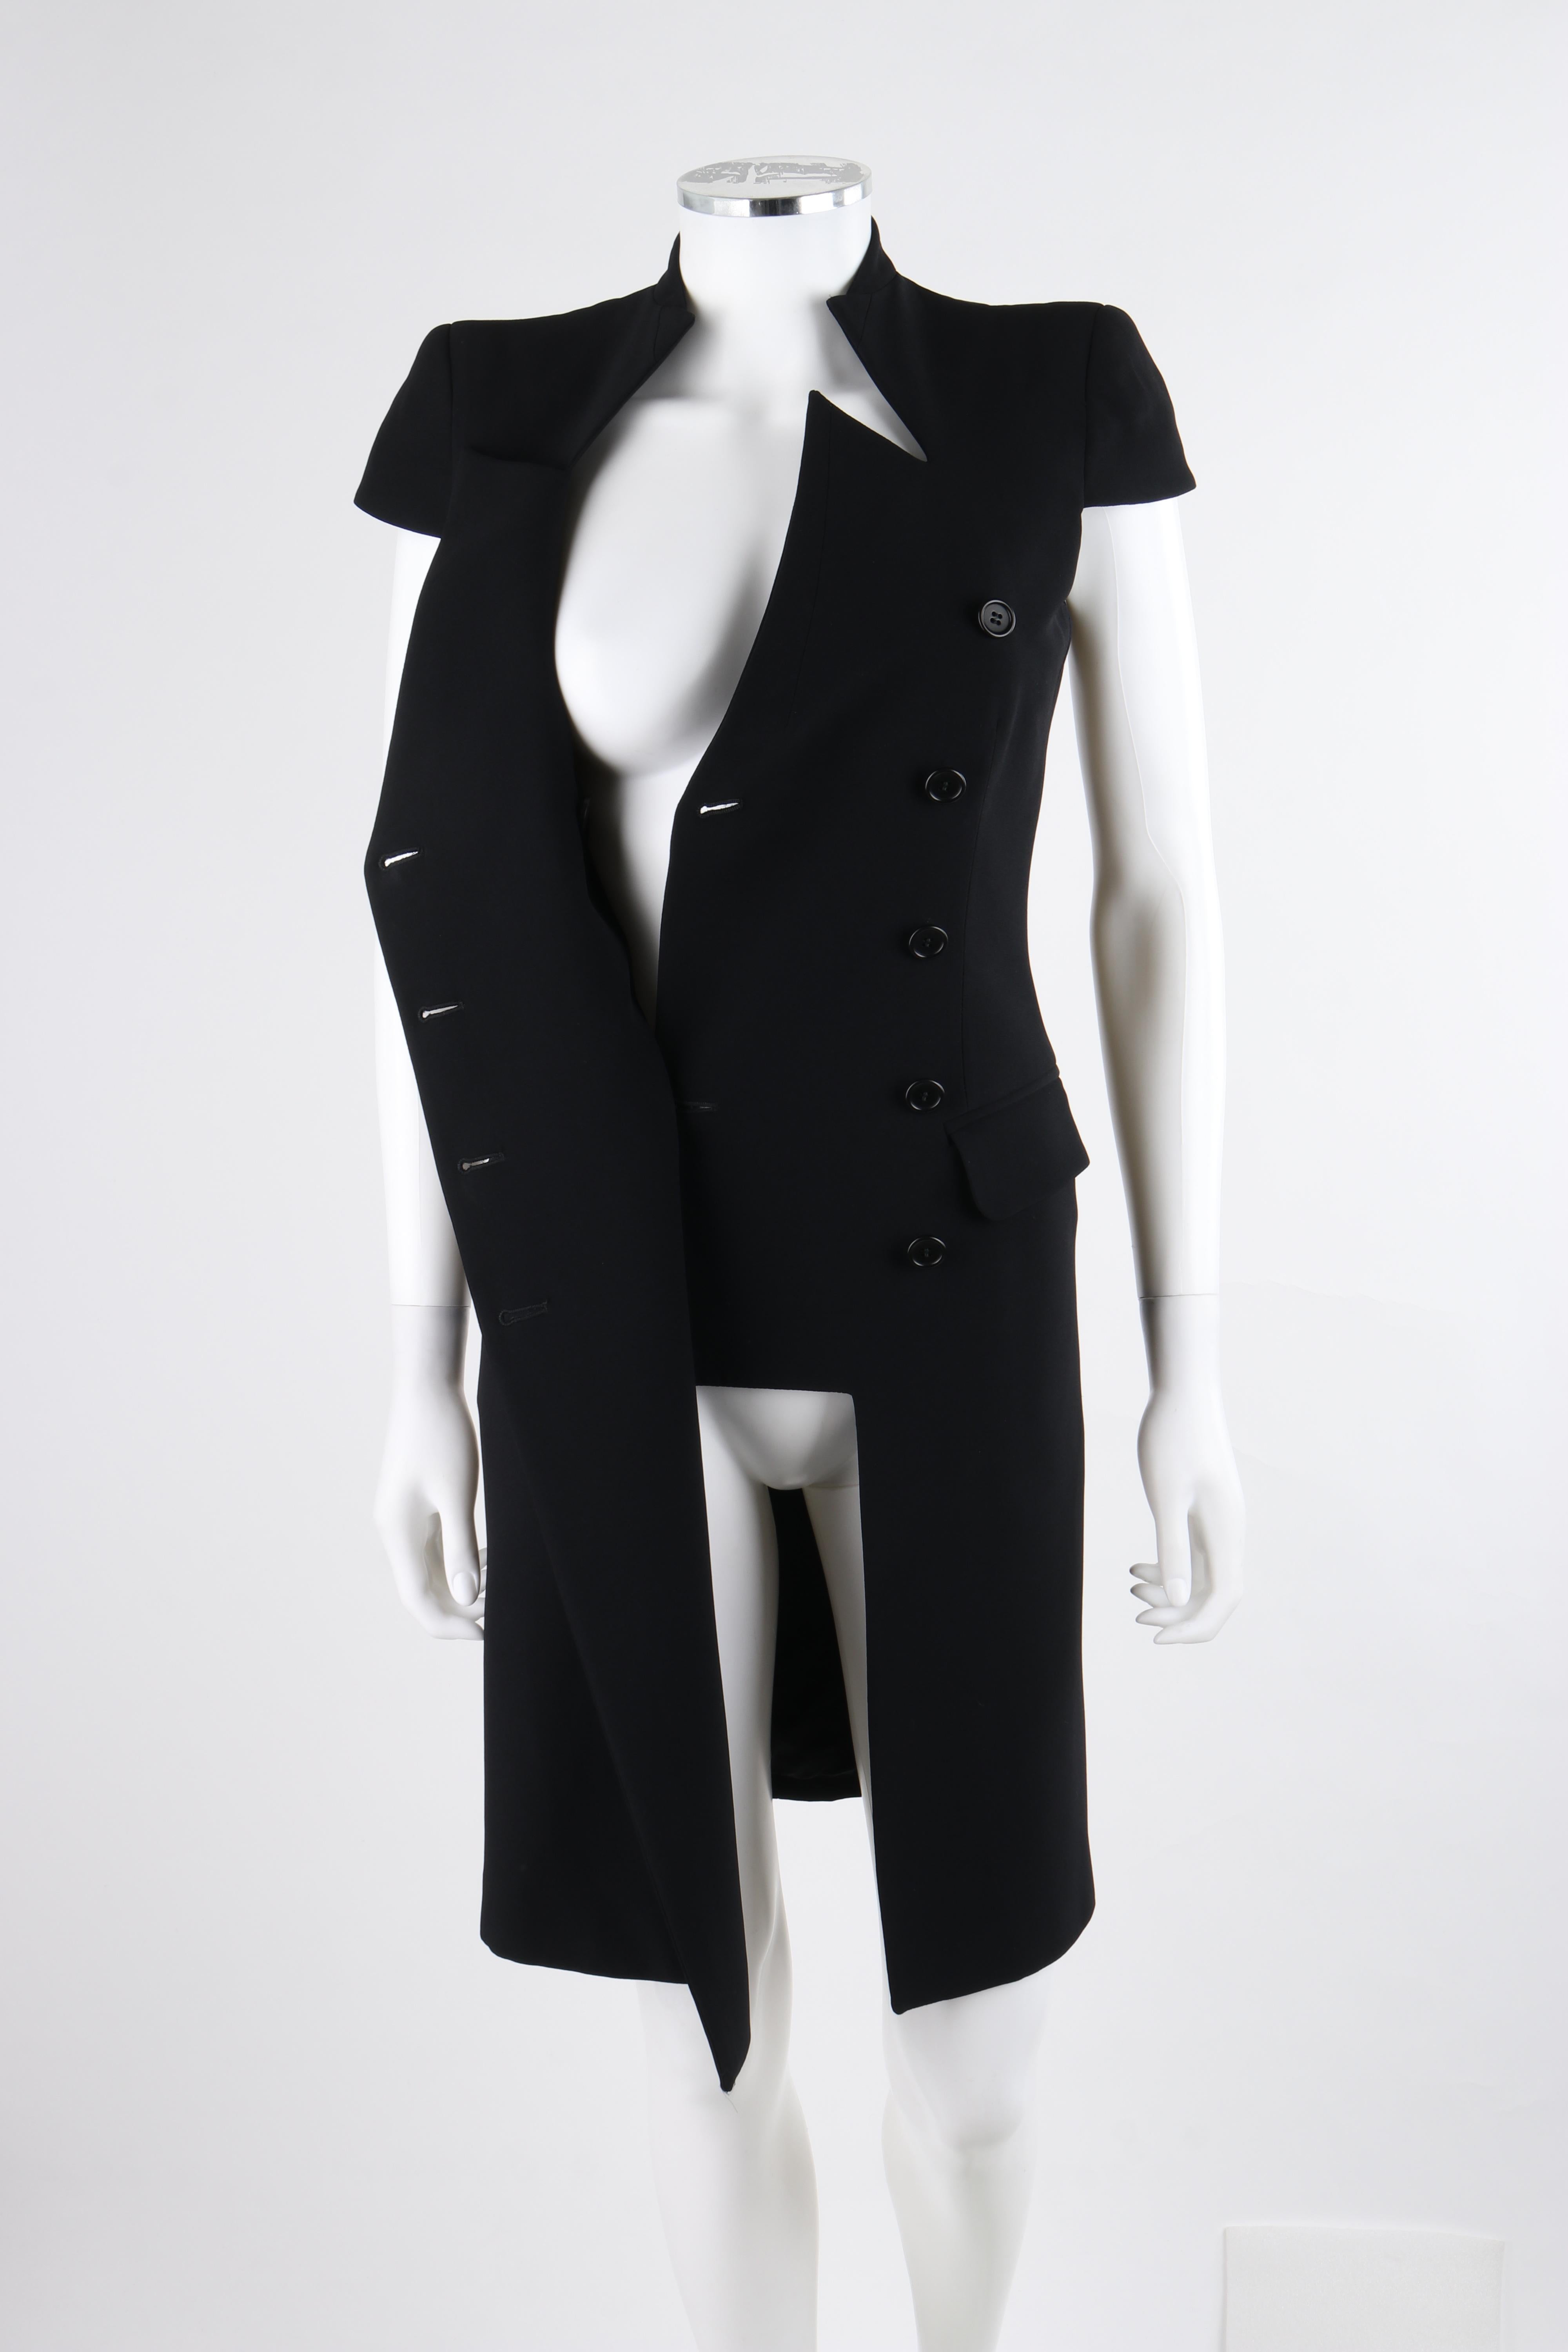 ALEXANDER McQUEEN c.2012 Black Double Breasted Button Up Collar Cocktail Dress For Sale 3